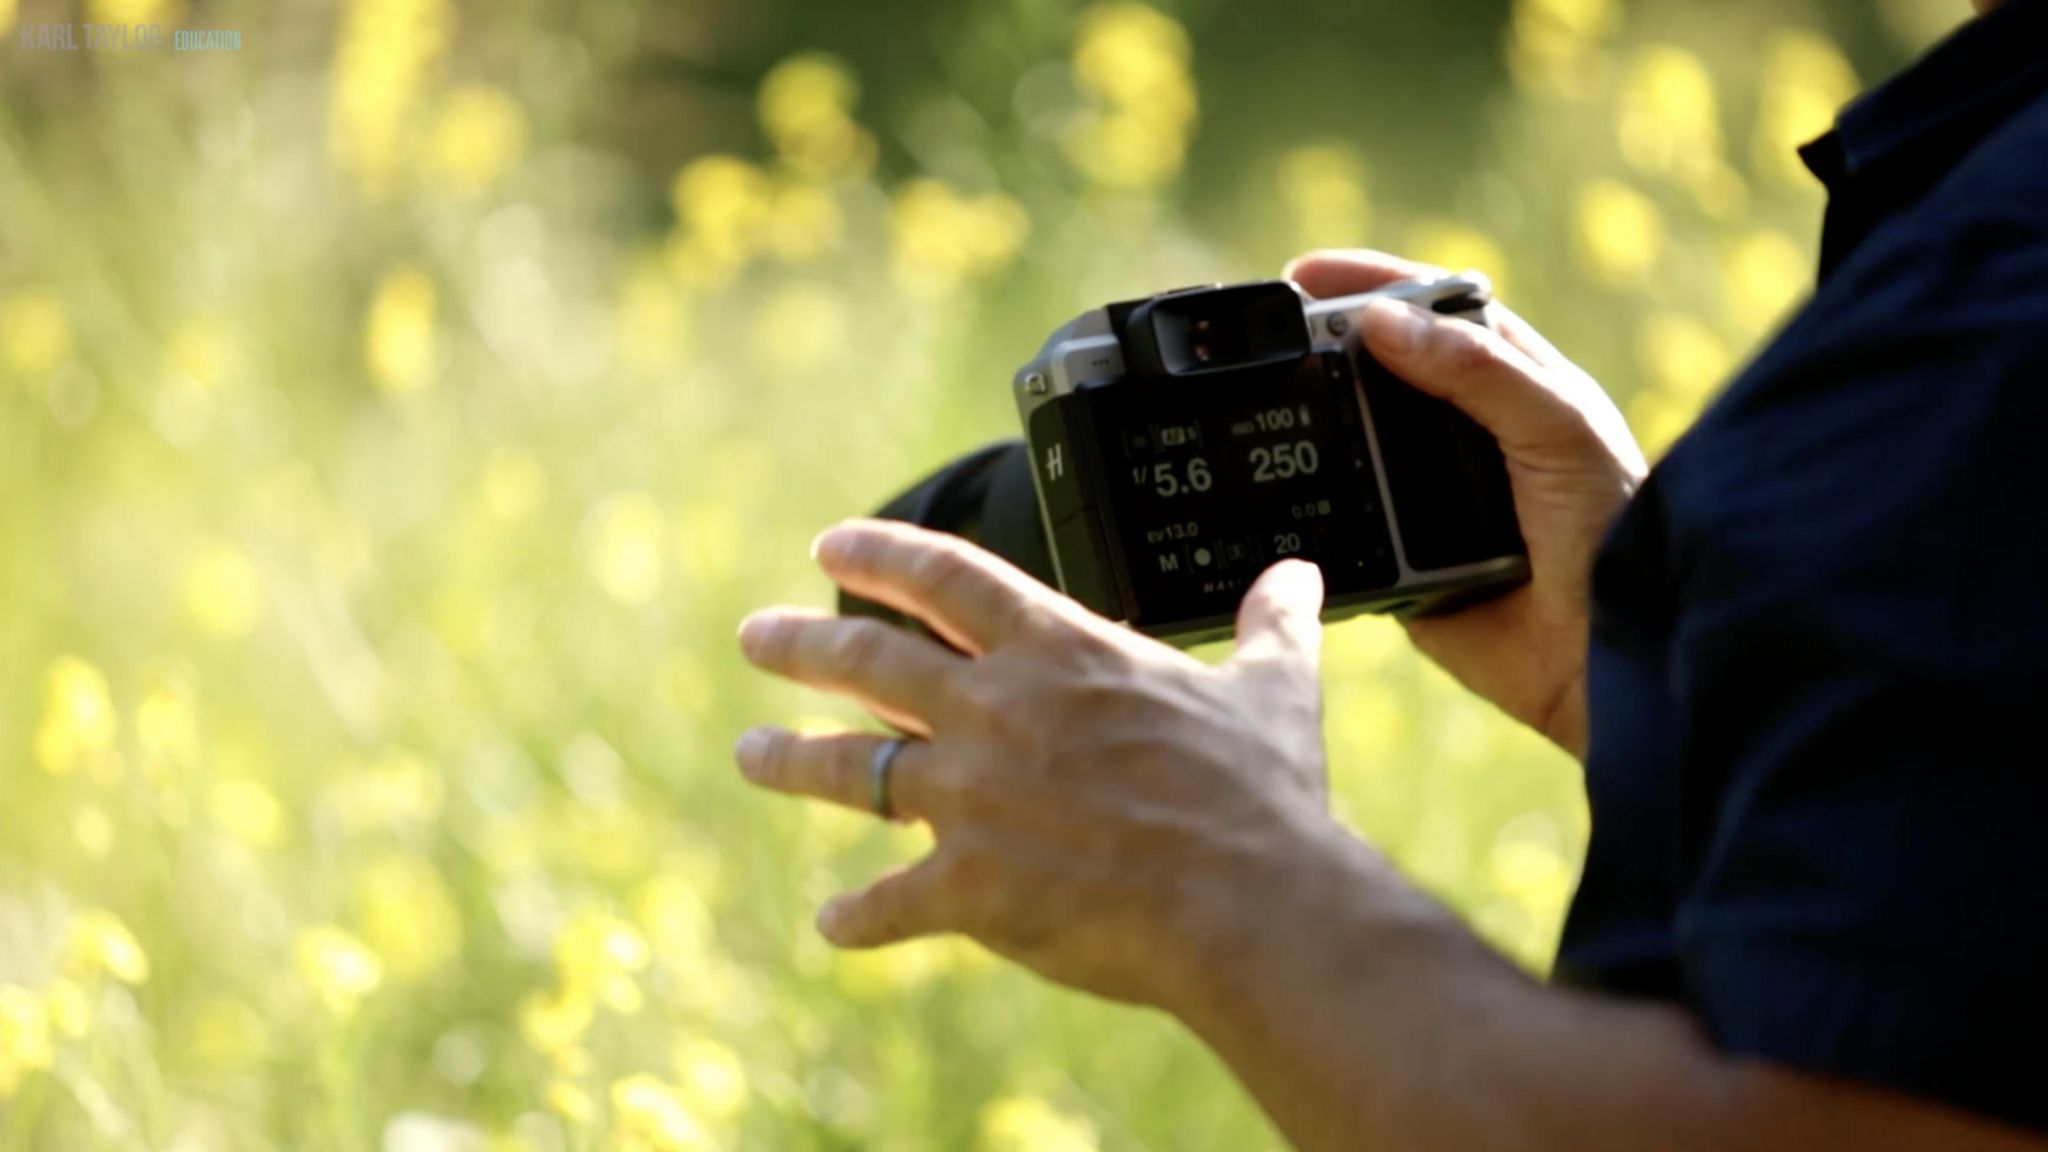 X1D Hasselblad Camera Photography Review (and portrait shoot!) – Part 1